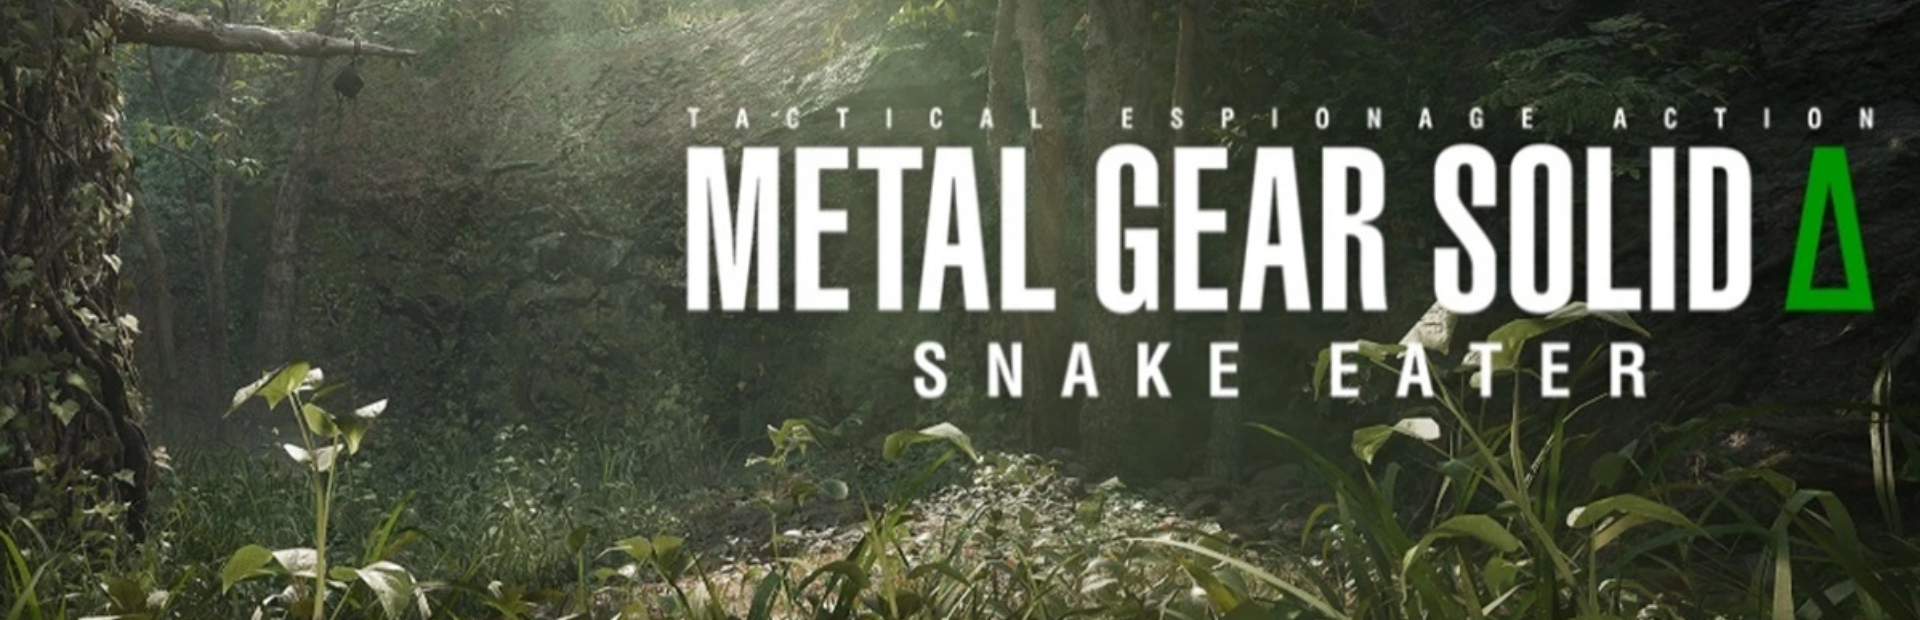 Metal.Gear .Solid Snake.Eater GB Mag Pic1